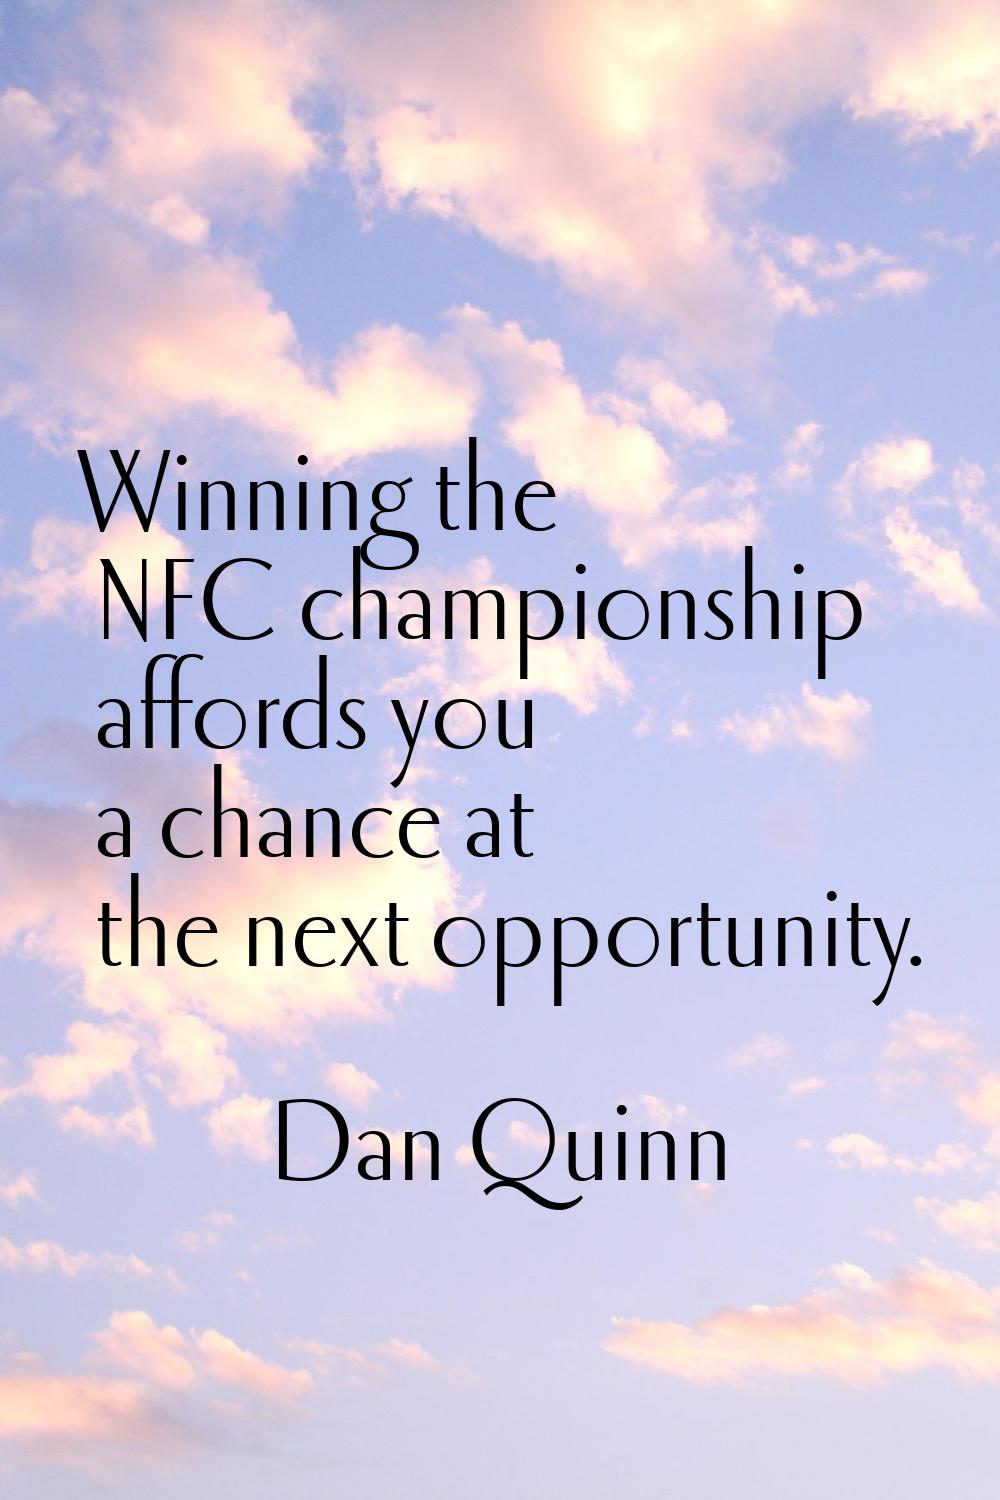 Winning the NFC championship affords you a chance at the next opportunity.